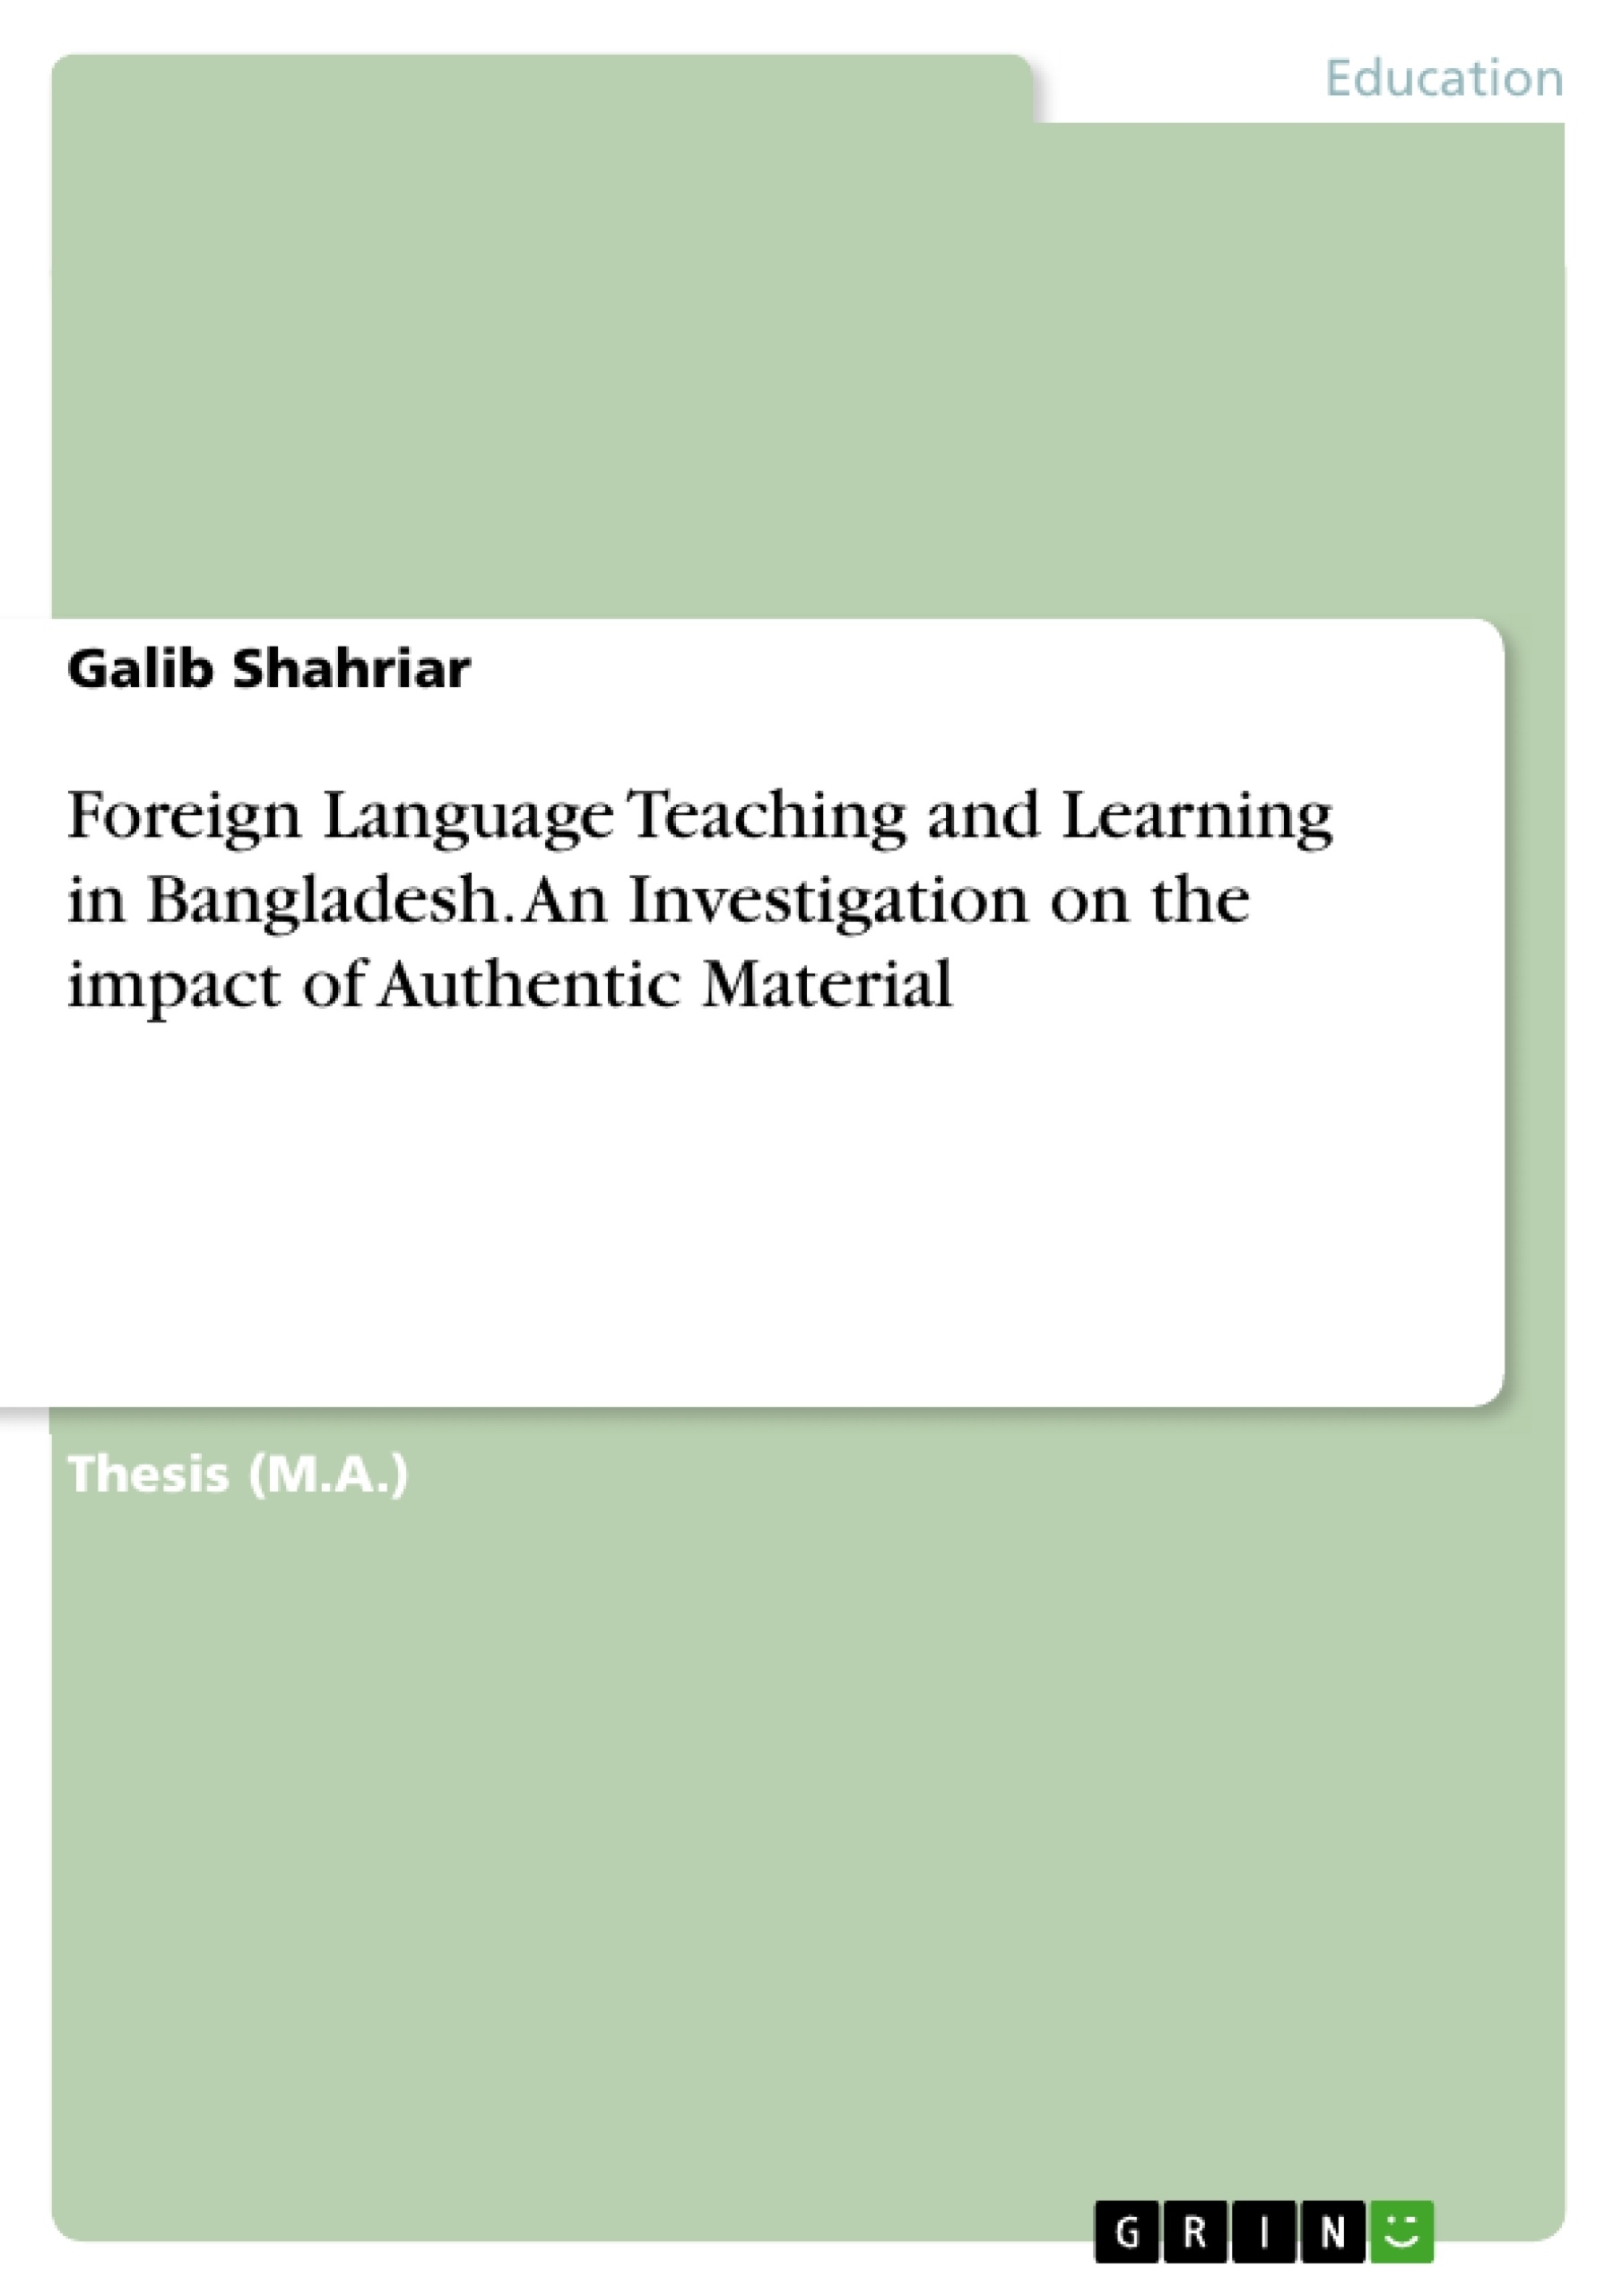 Title: Foreign Language Teaching and Learning in Bangladesh. An Investigation on the impact of Authentic Material